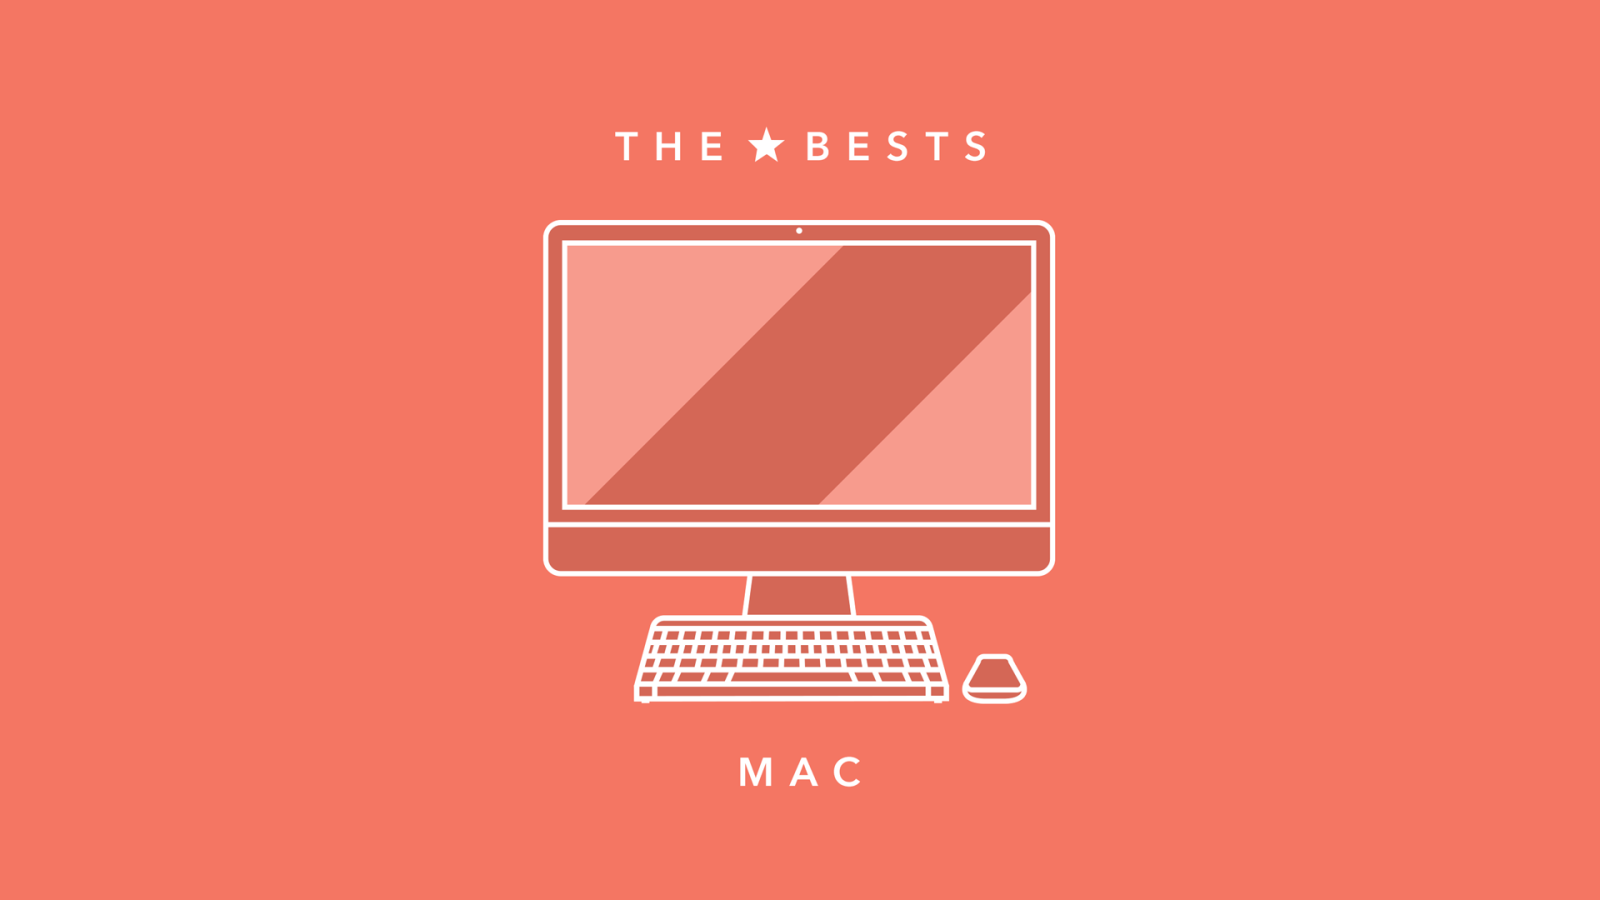 Games For Mac